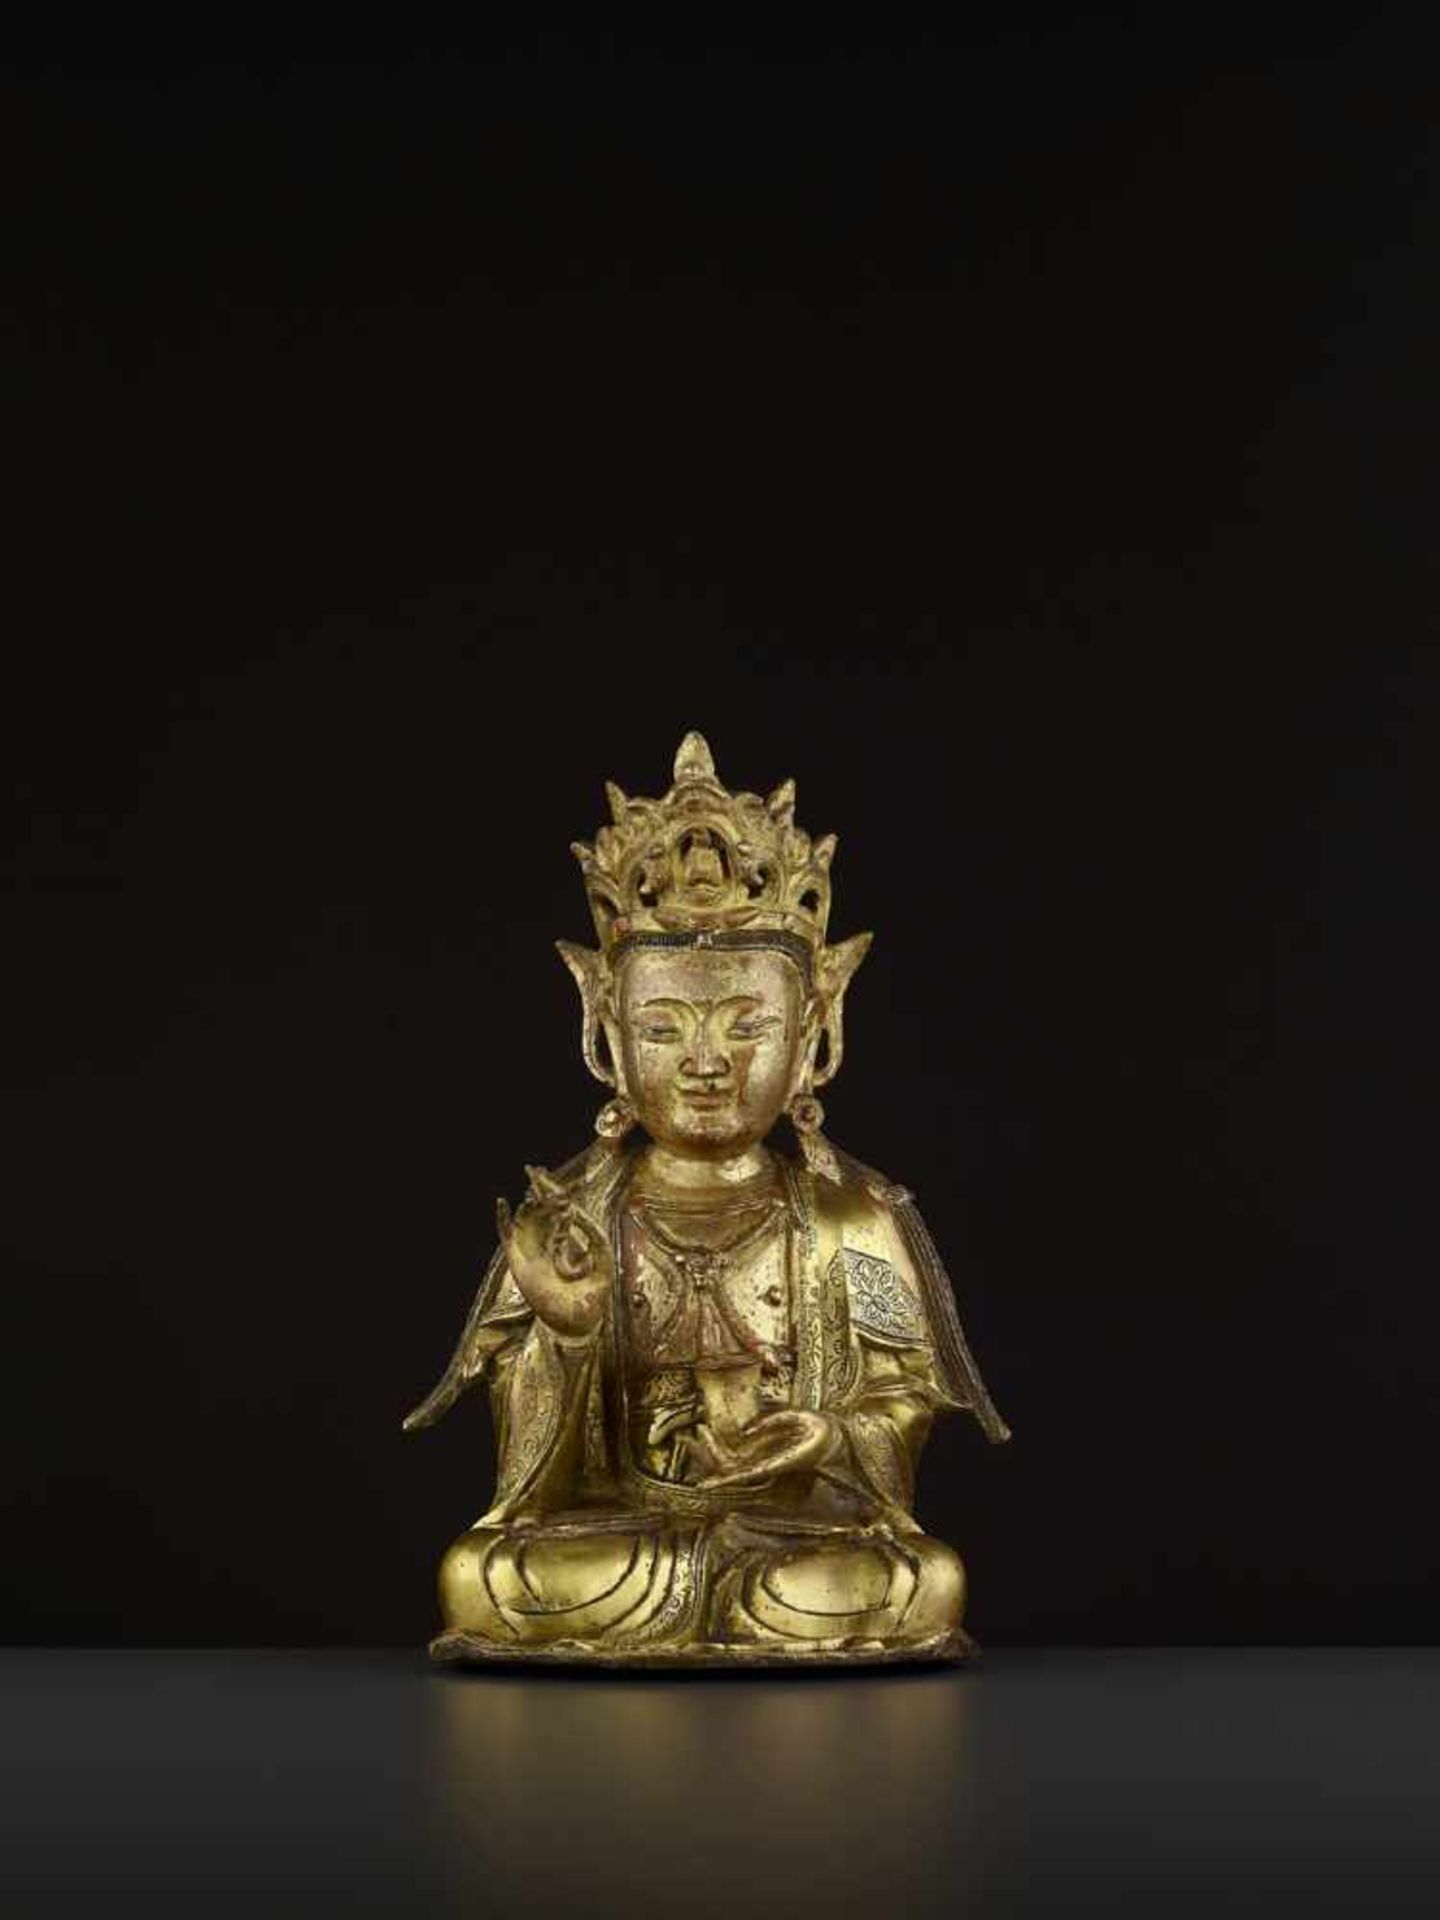 A FINELY CAST GILT-BRONZE FIGURE OF GUANYIN, MING DYNASTY China, 16th-17th century. The figure is - Image 3 of 10